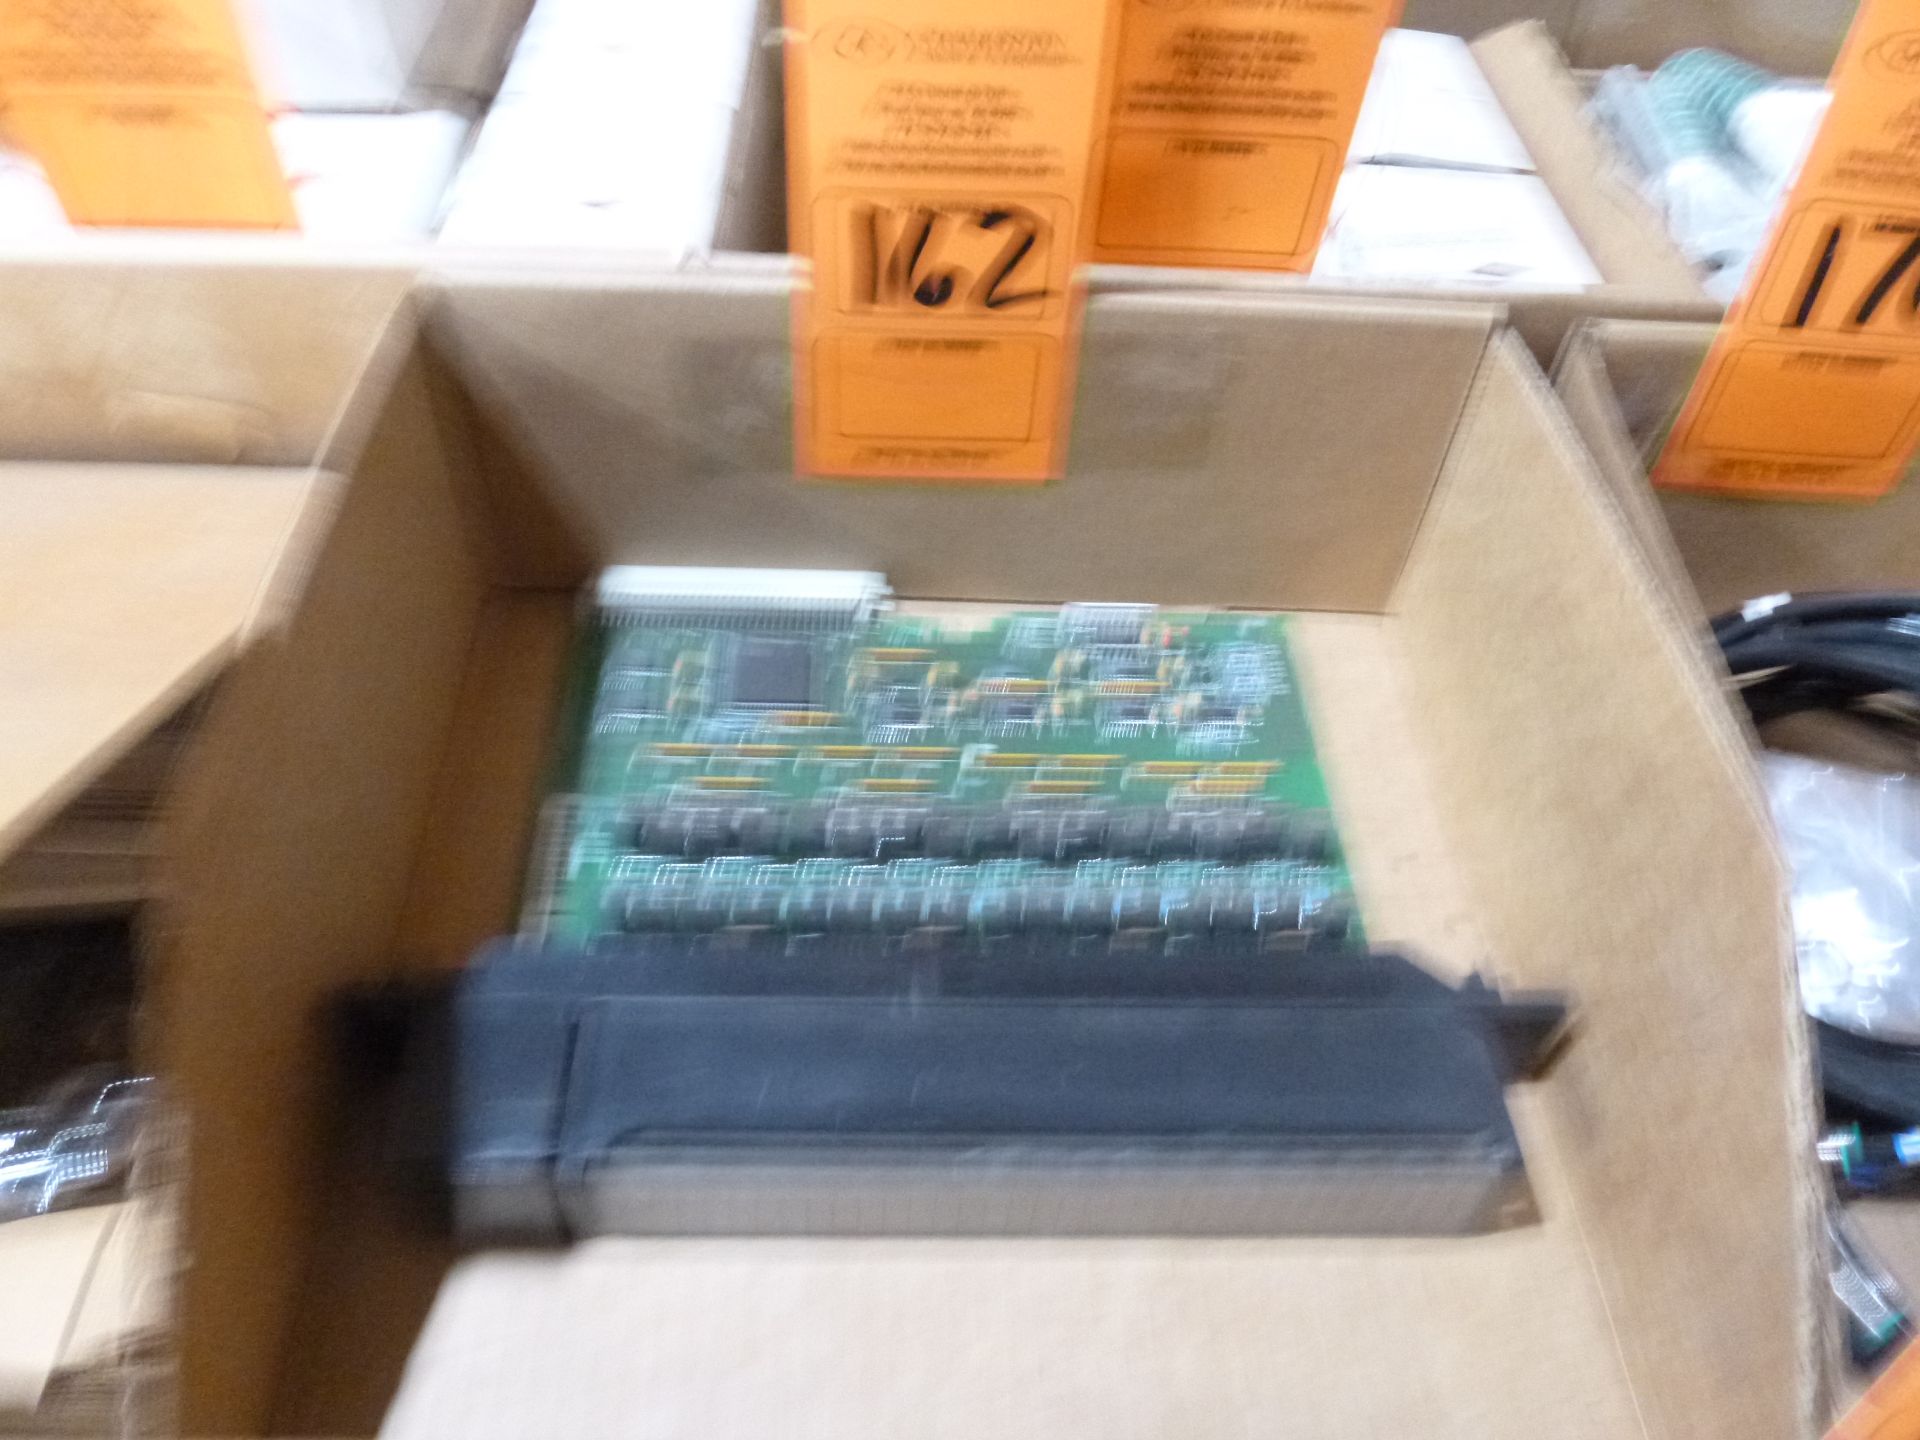 GE Fanuc model IC697MDL750, as always with Brolyn LLC auctions, all lots can be picked up from